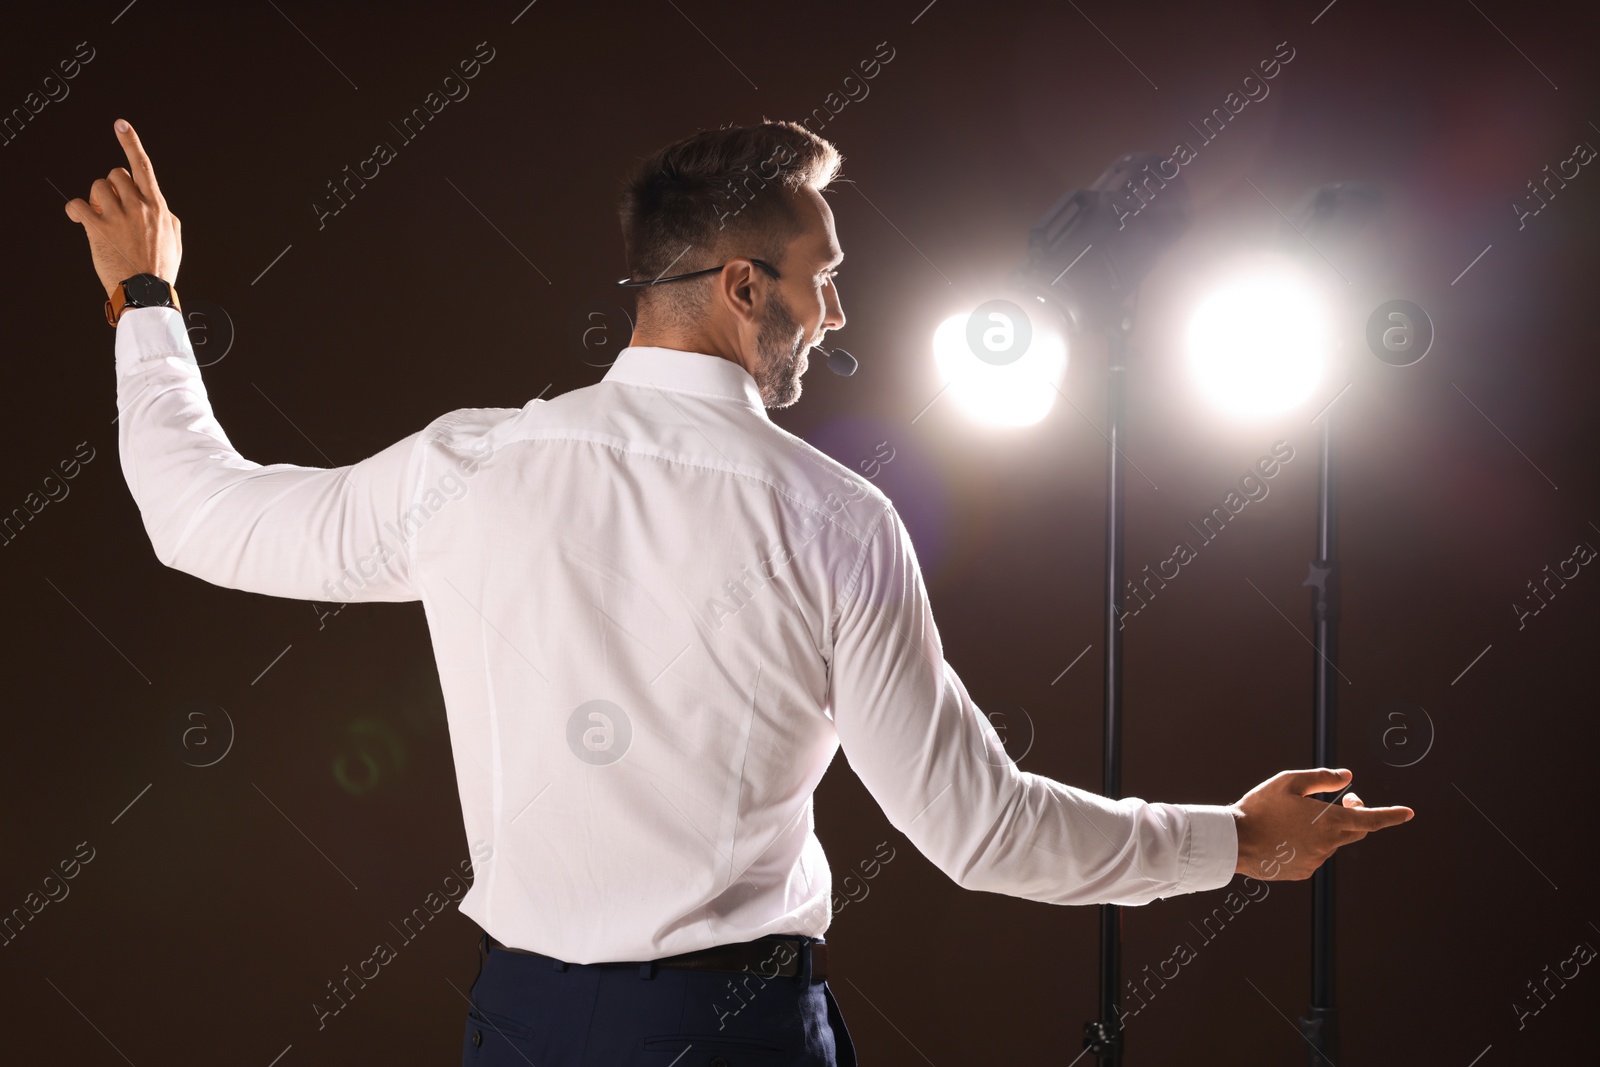 Photo of Motivational speaker with headset performing on stage, back view